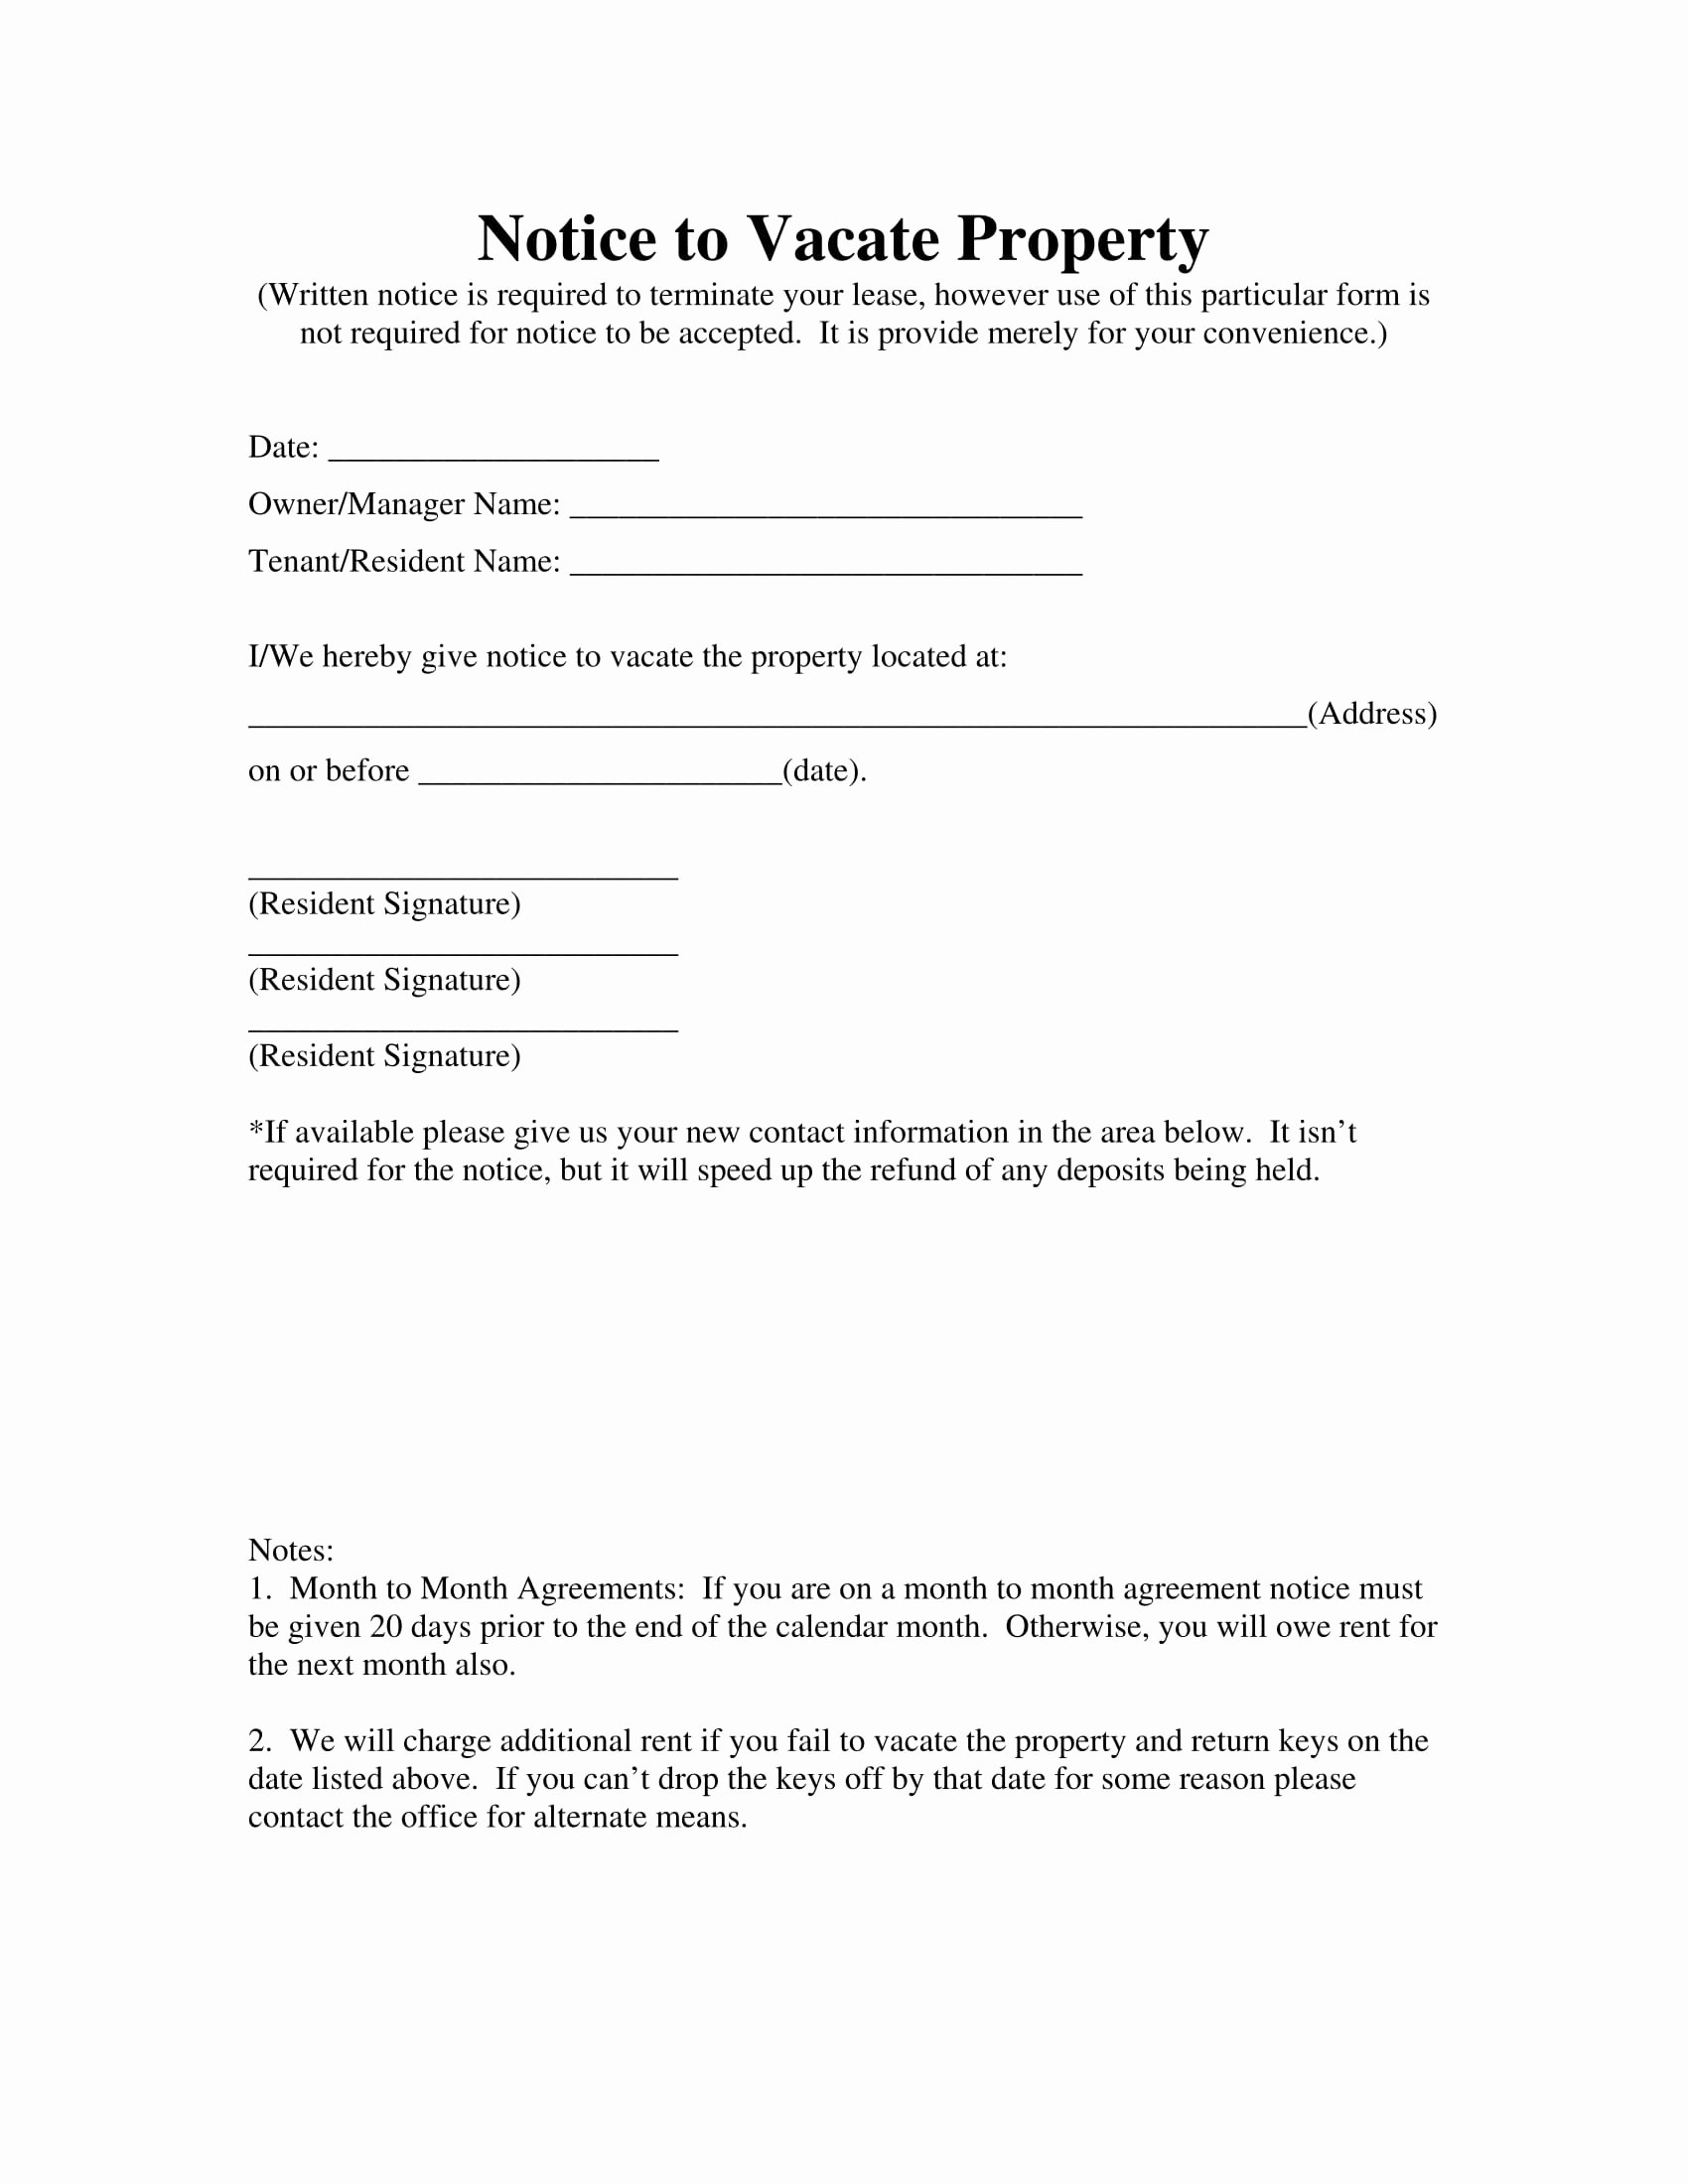 Landlord Notice to Vacate New 15 Landlord forms Landlord Agreements Notice forms